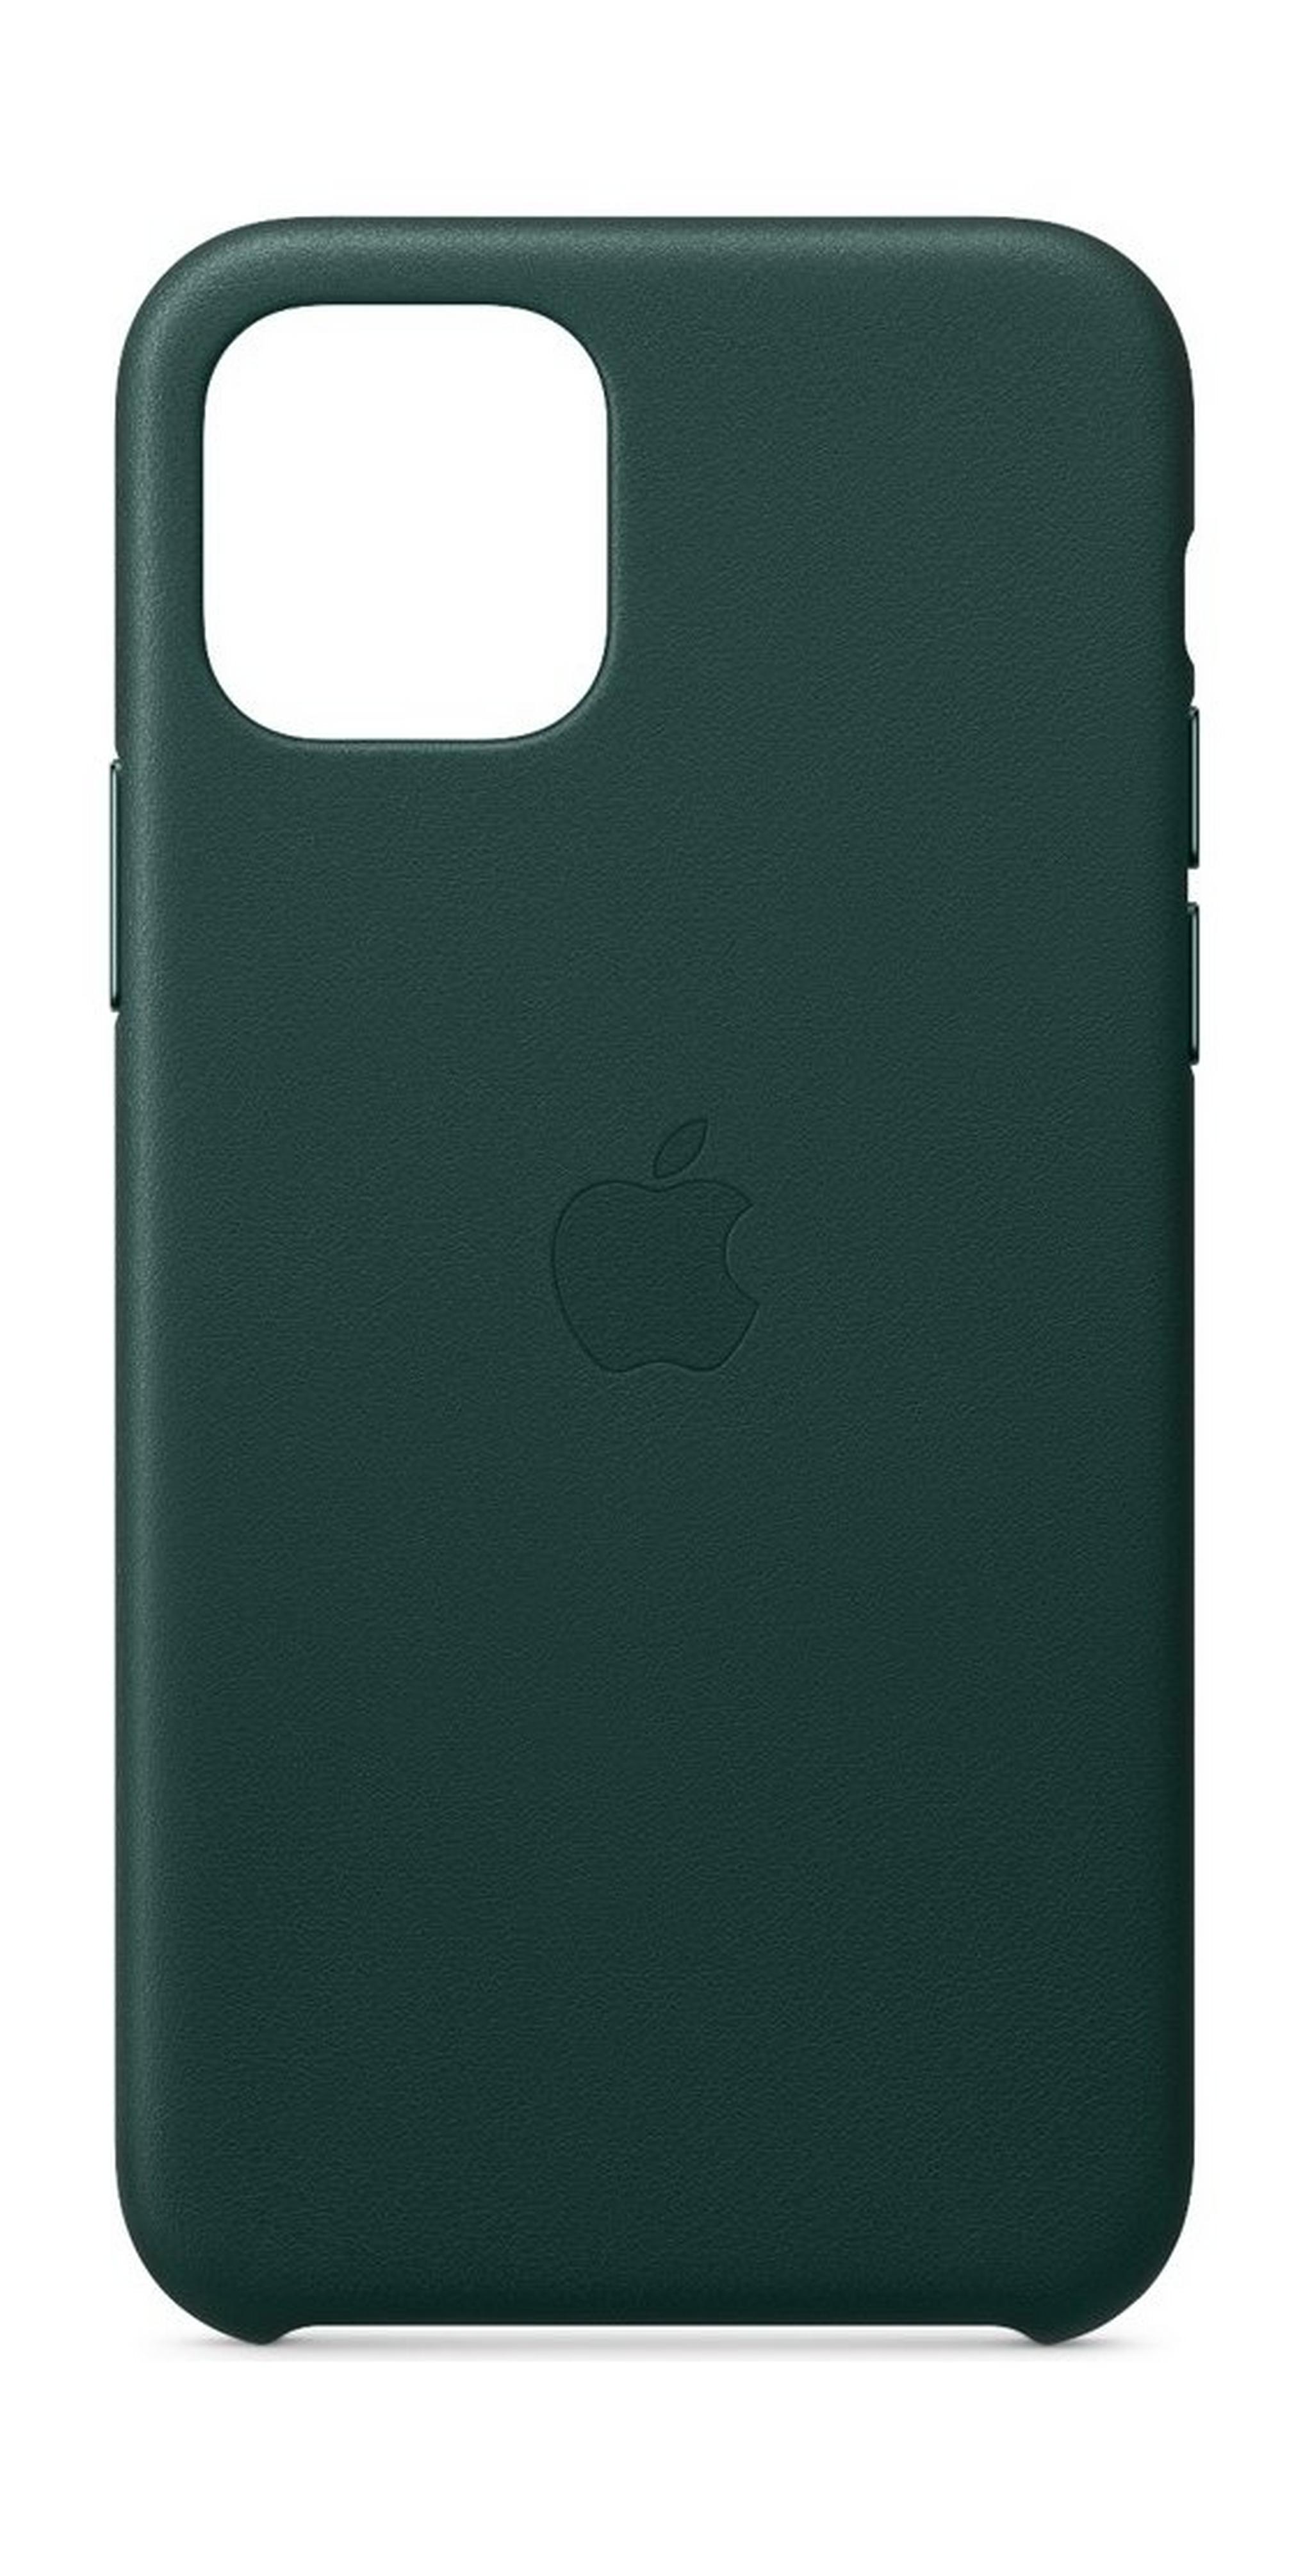 Apple iPhone 11 Pro Max Leather Case - Forest Green